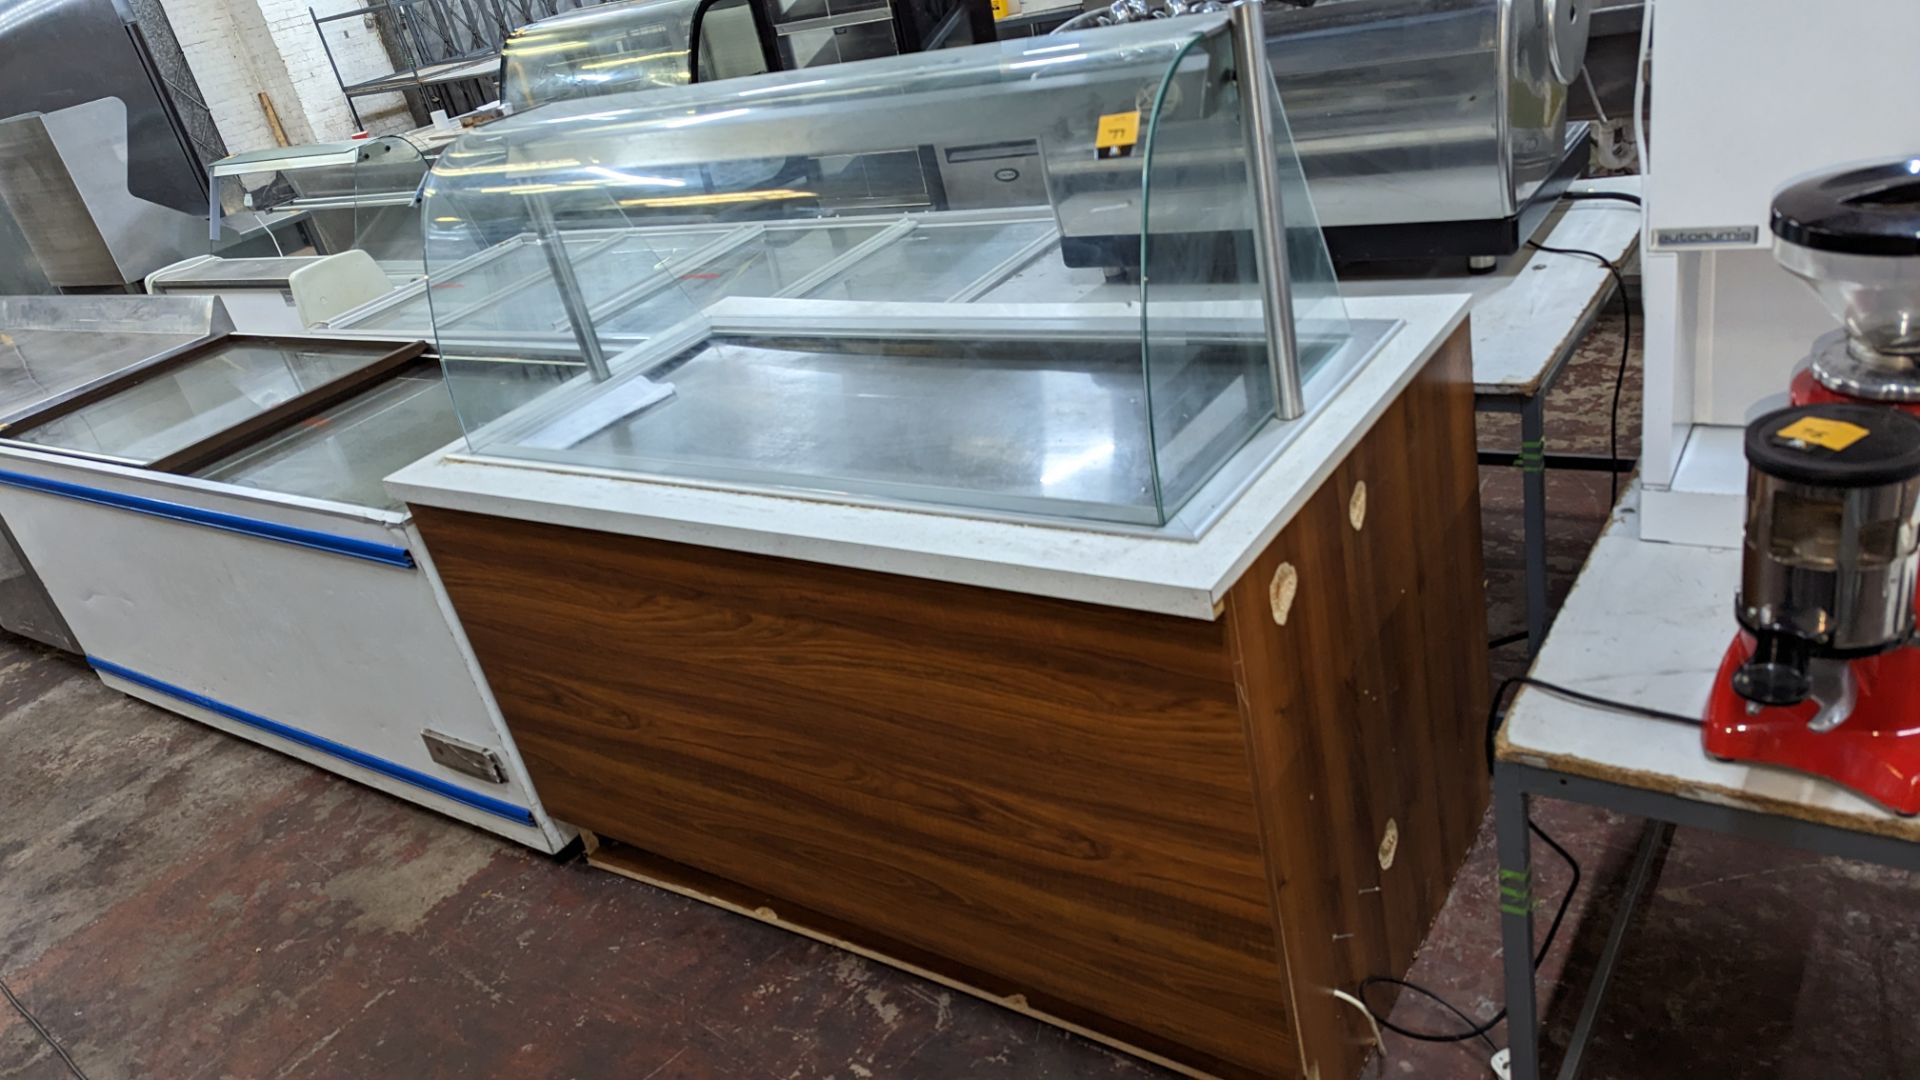 XL refrigerated drop-in display unit - Image 2 of 8